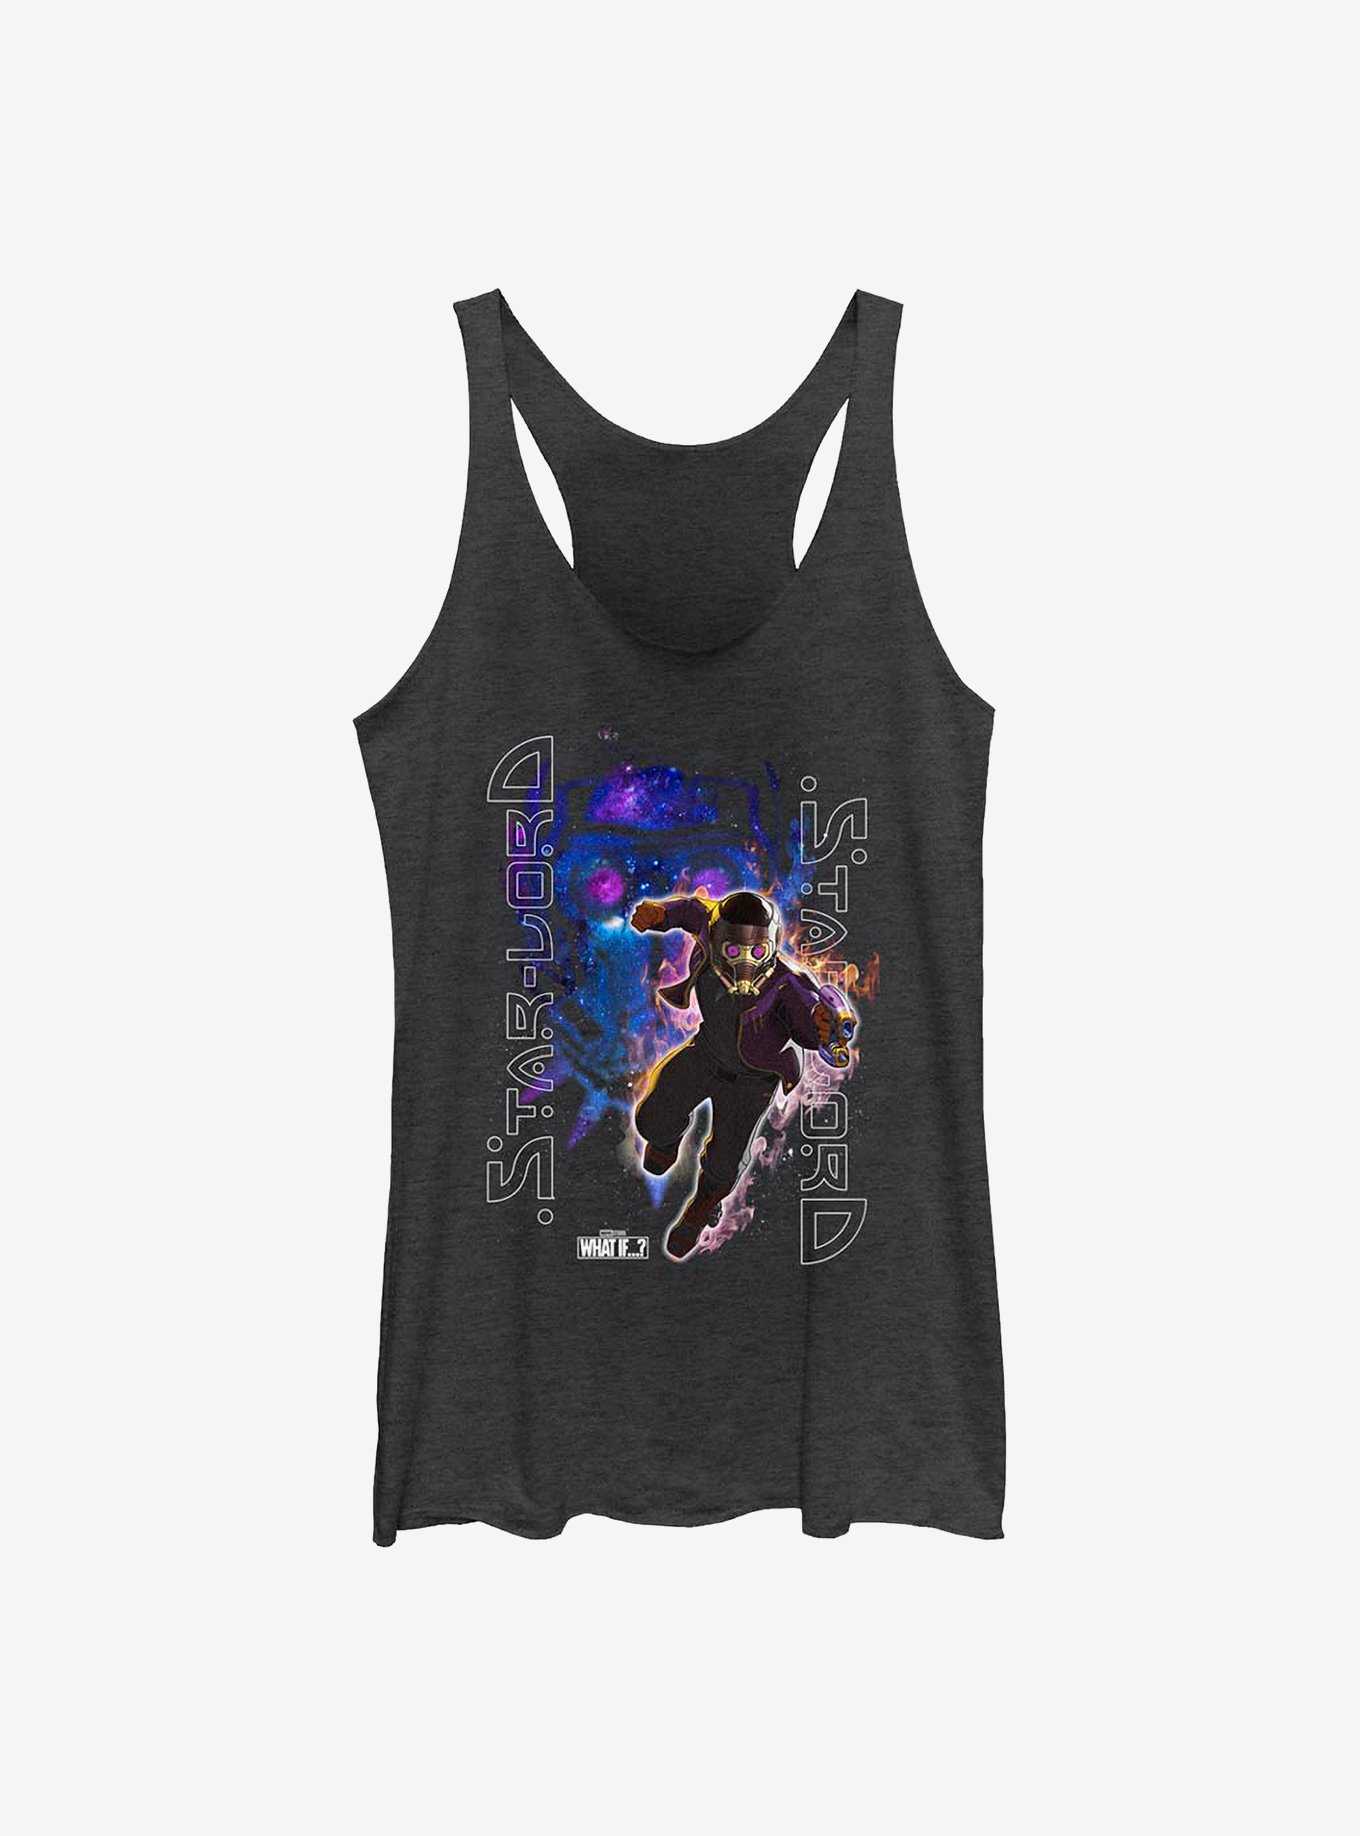 Marvel What If...? Galaxy King Star-Lord Girls Tank, , hi-res